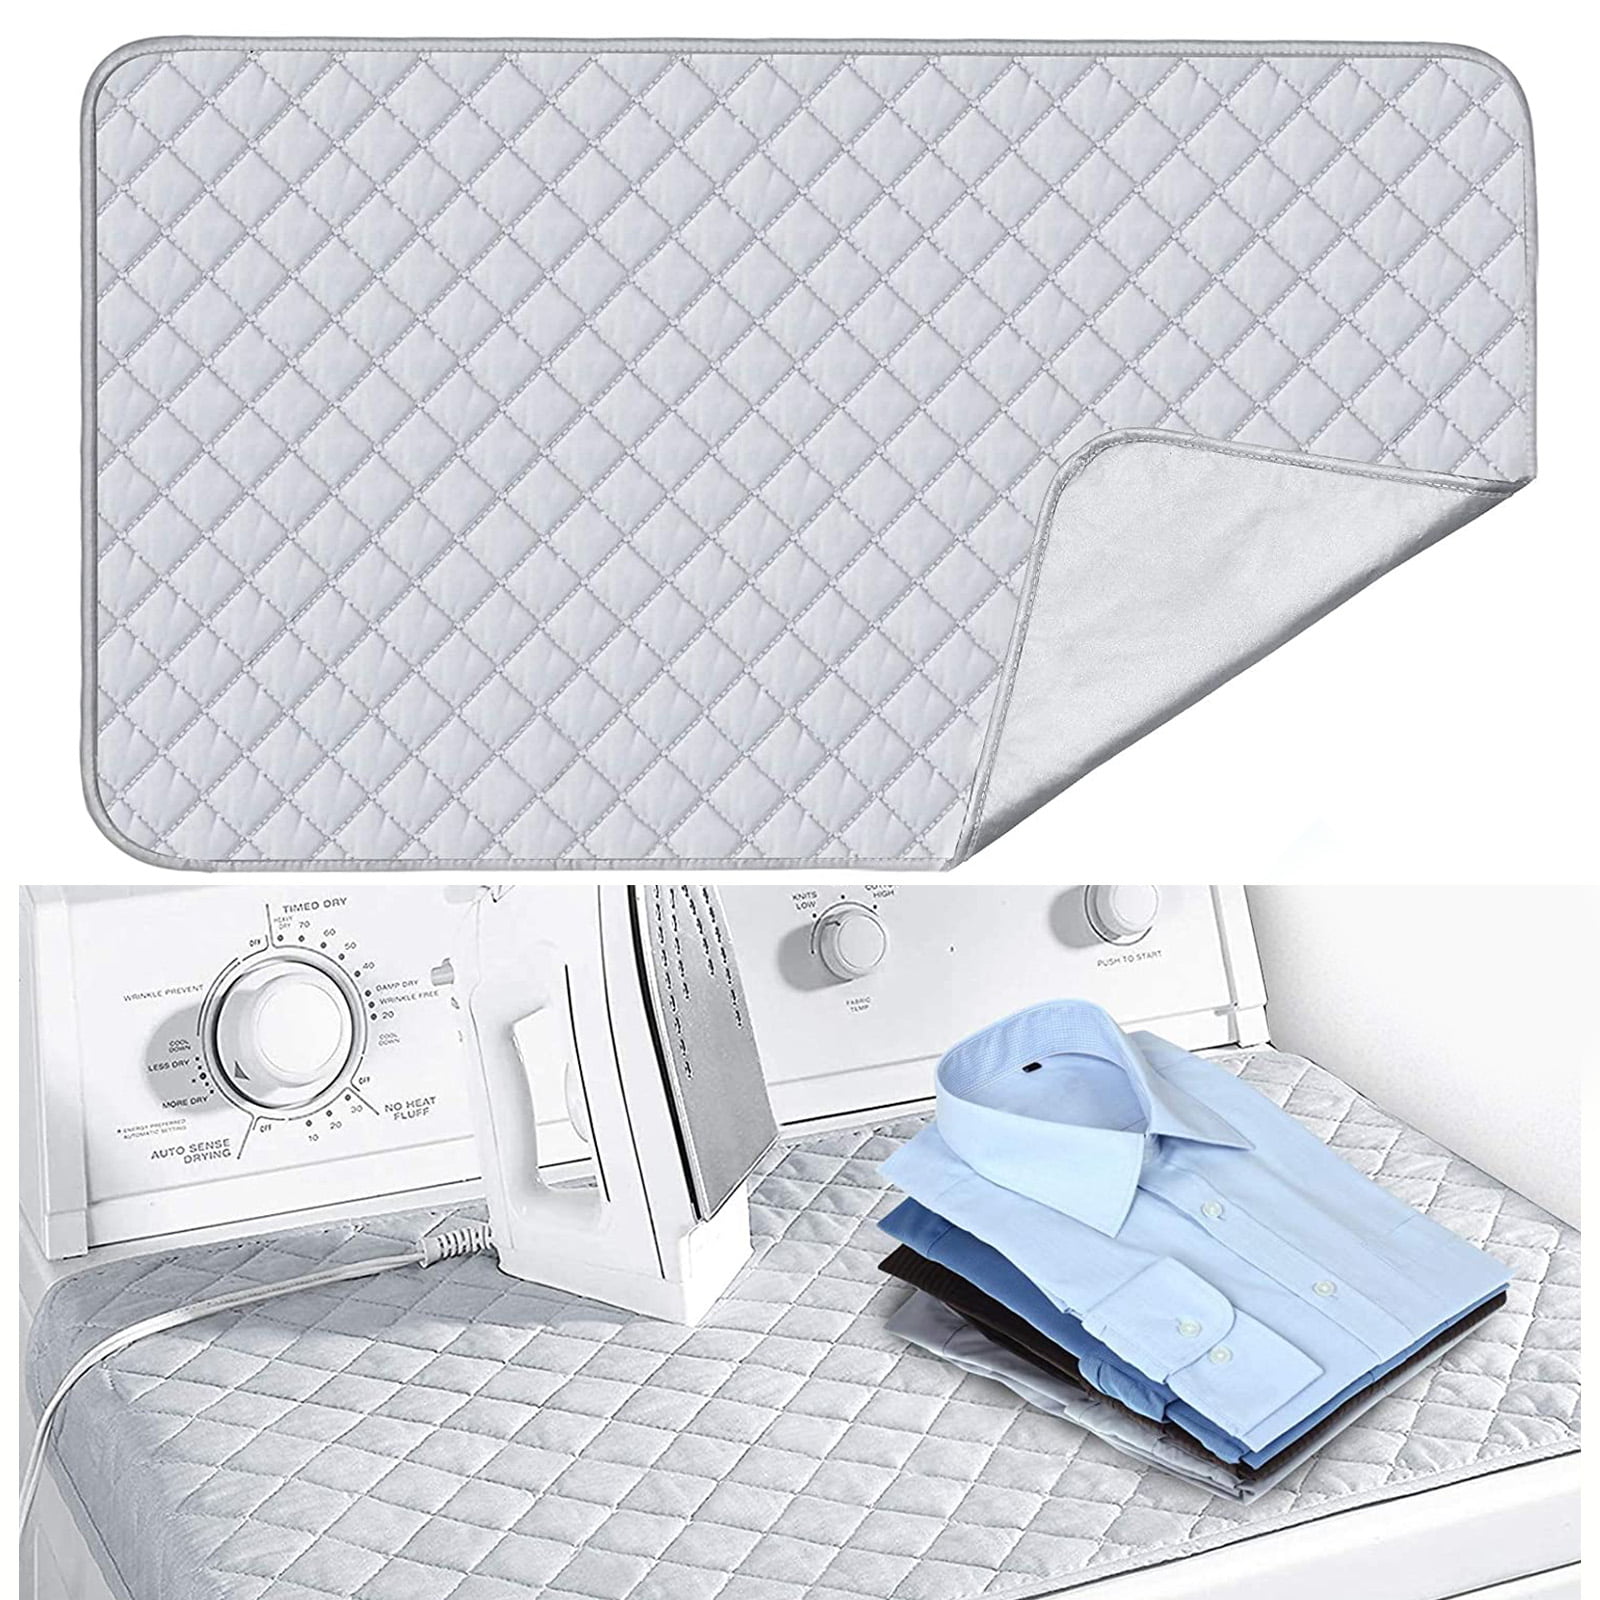 Grand thousand Ironing Blanket Mat Laundry Pad Quilted Washer Dryer Heat Resi... 